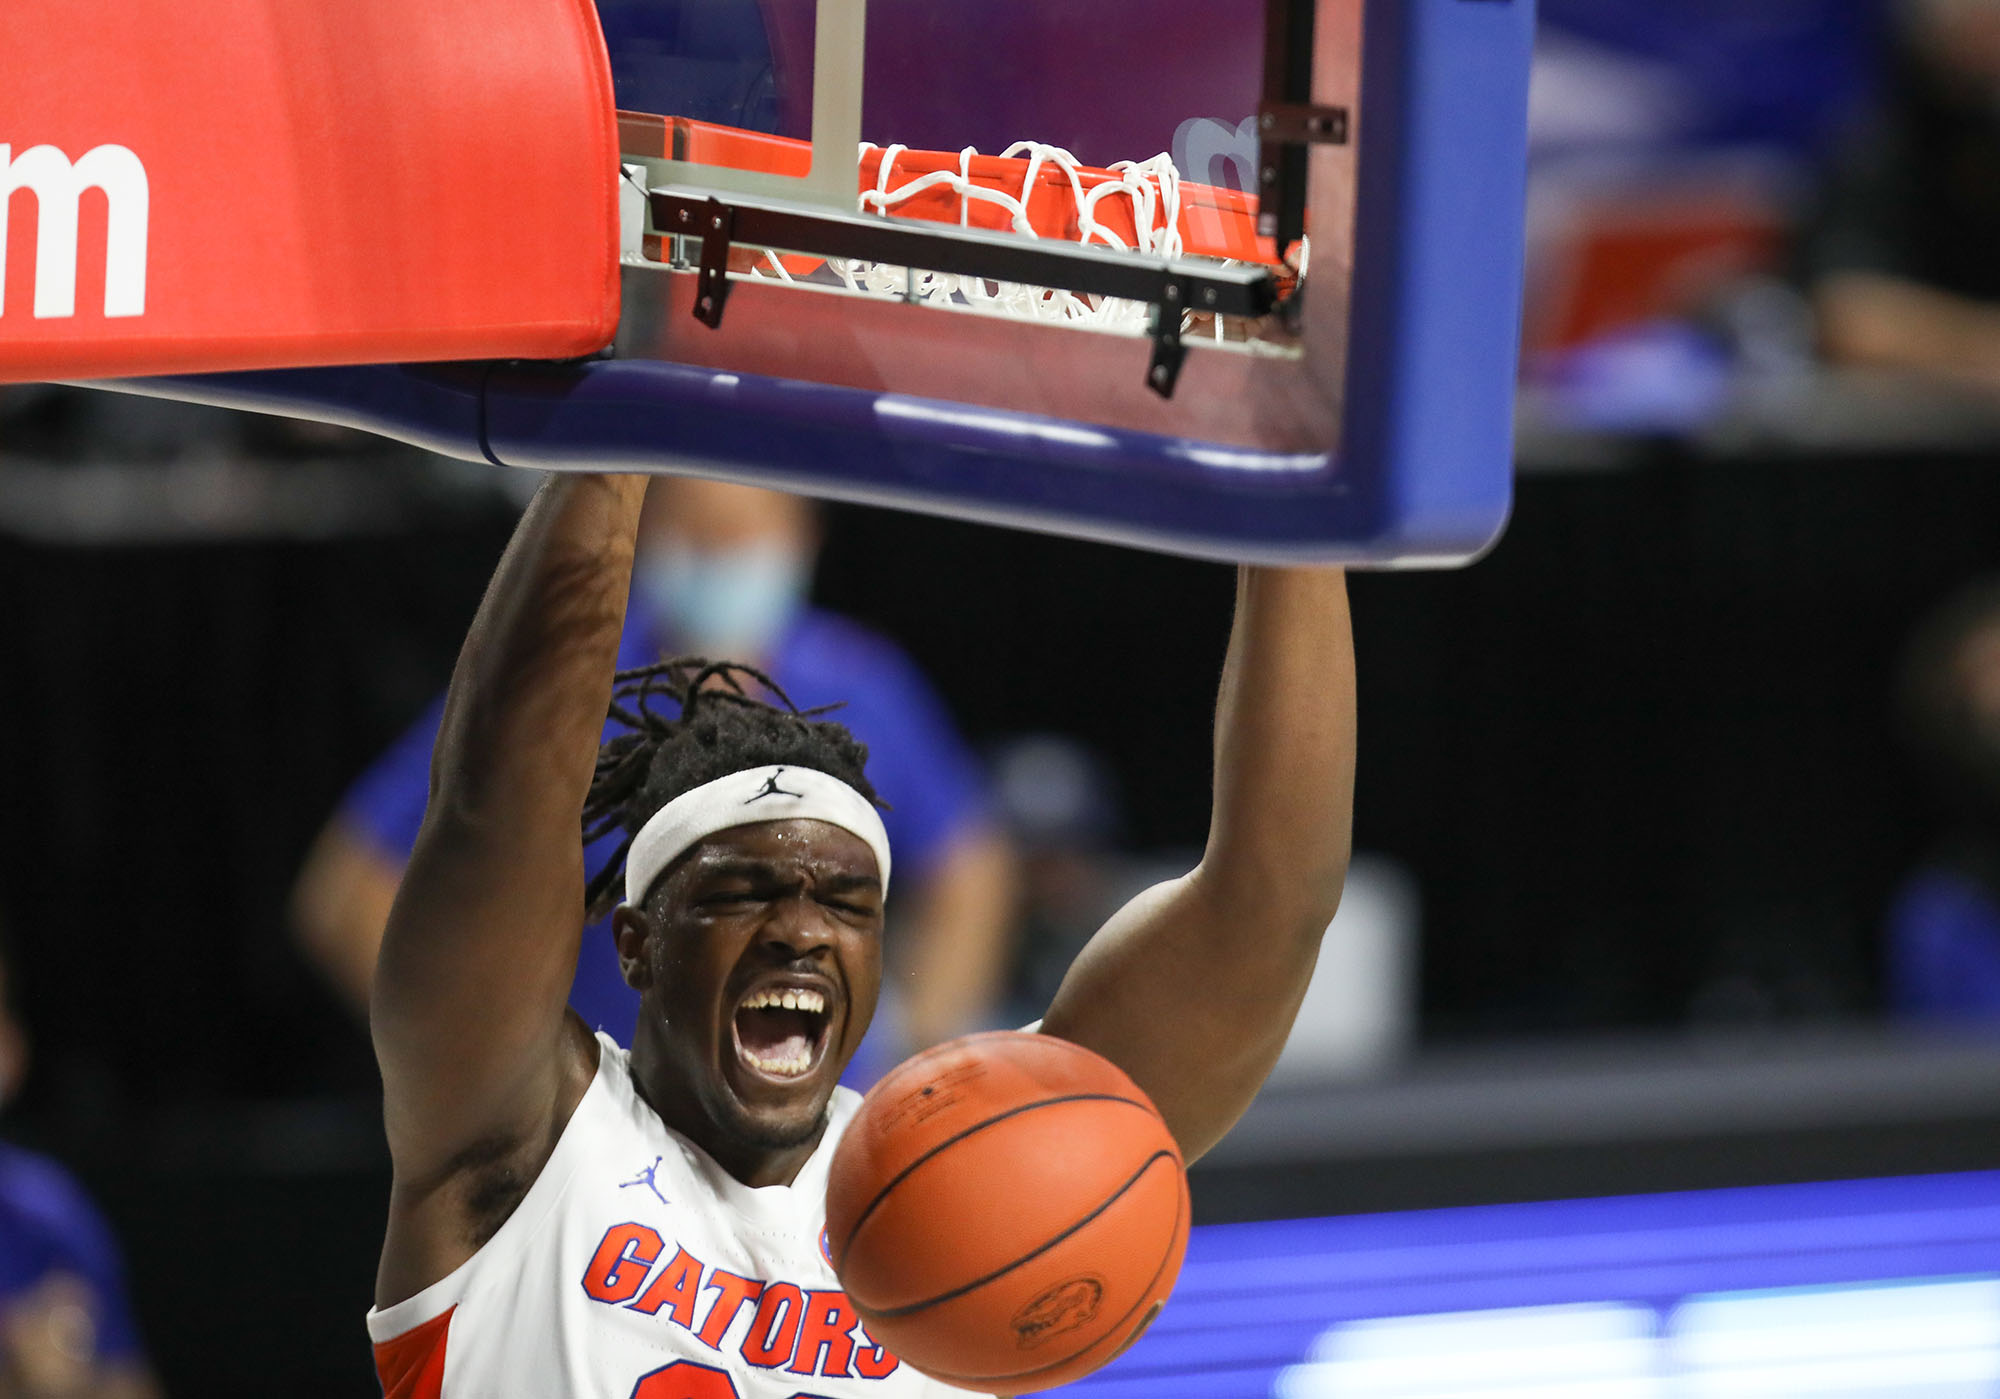 Florida Gators center Jason Jitoboh (33) yells after a dunk against the Tennessee Volunteers during the second half of an NCAA college basketball game Tuesday, Jan. 19. 2021, in Gainesville, Fla. Florida defeated no. 6 Tennessee 75-49. (AP Photo/Matt Stamey)